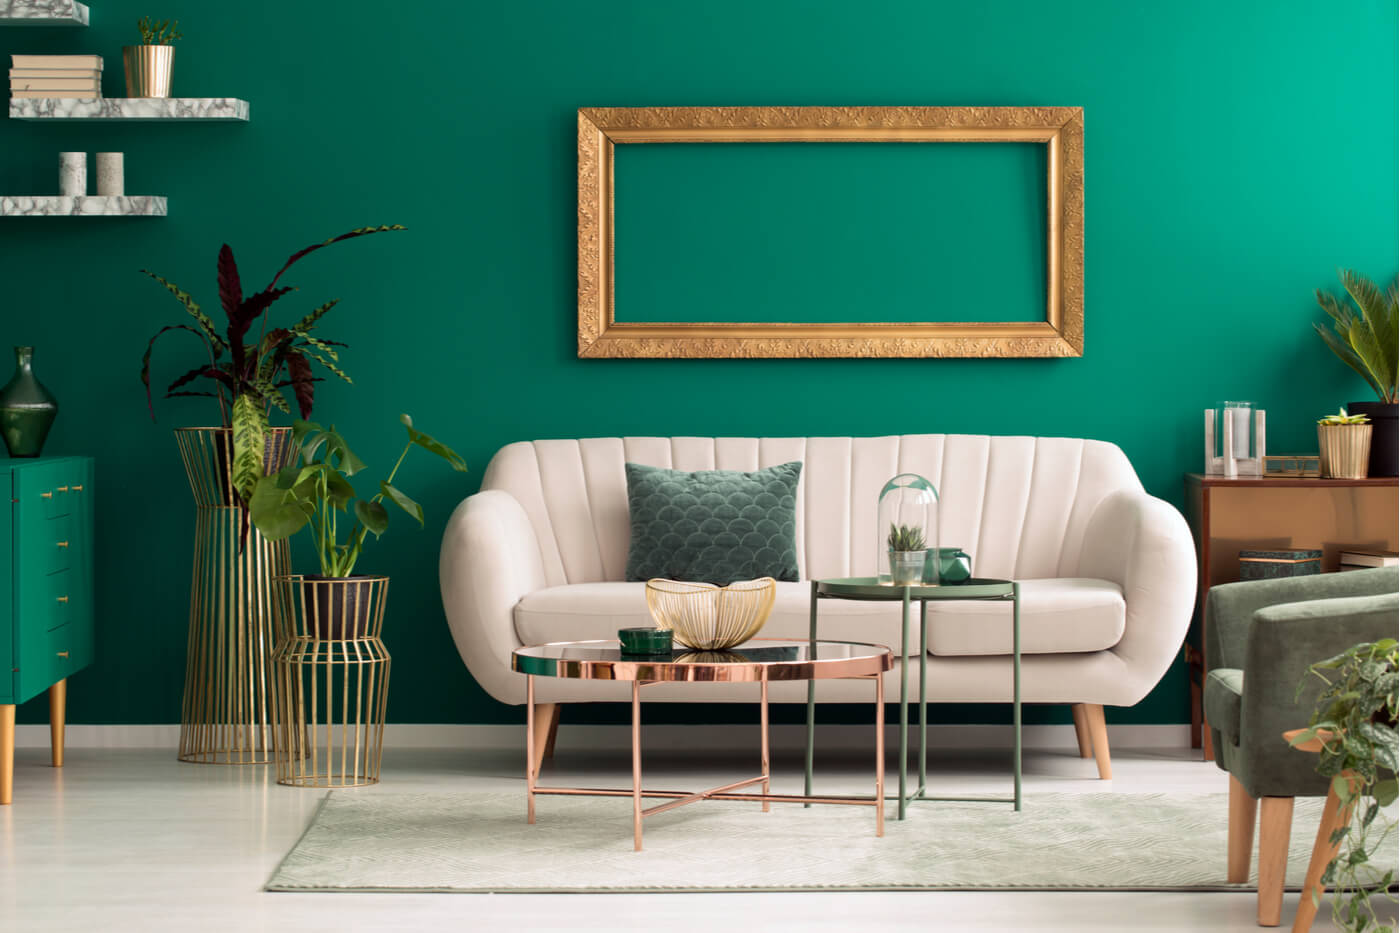 The relationship between green and gold: Class, style, and elegance